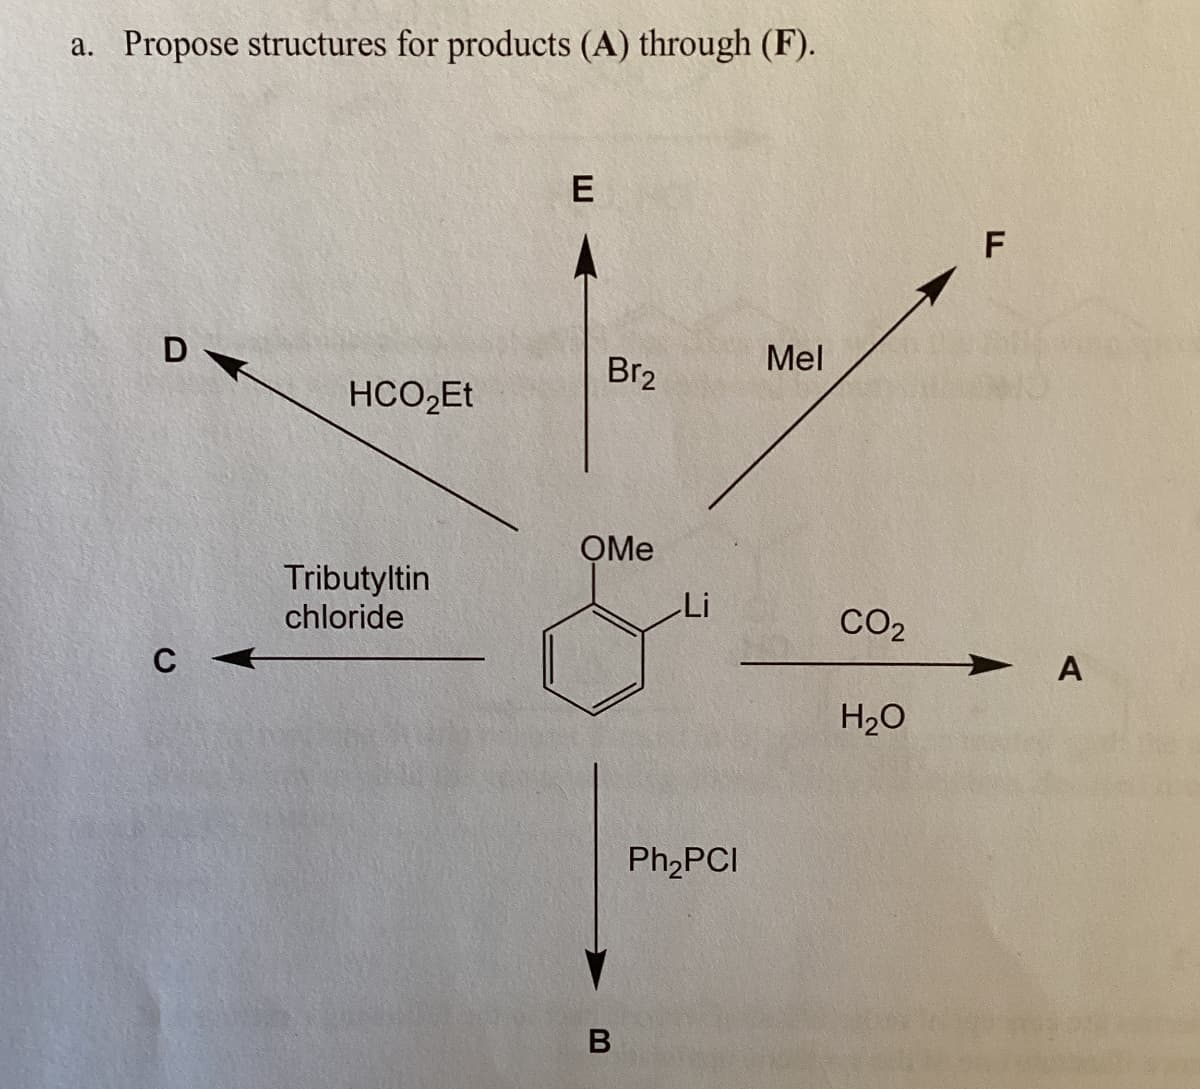 a. Propose structures for products (A) through (F).
E
Mel
Br2
D
HCO₂Et
F
OMe
Tributyltin
chloride
Li
CO2
C
A
H₂O
B
Ph2PCI